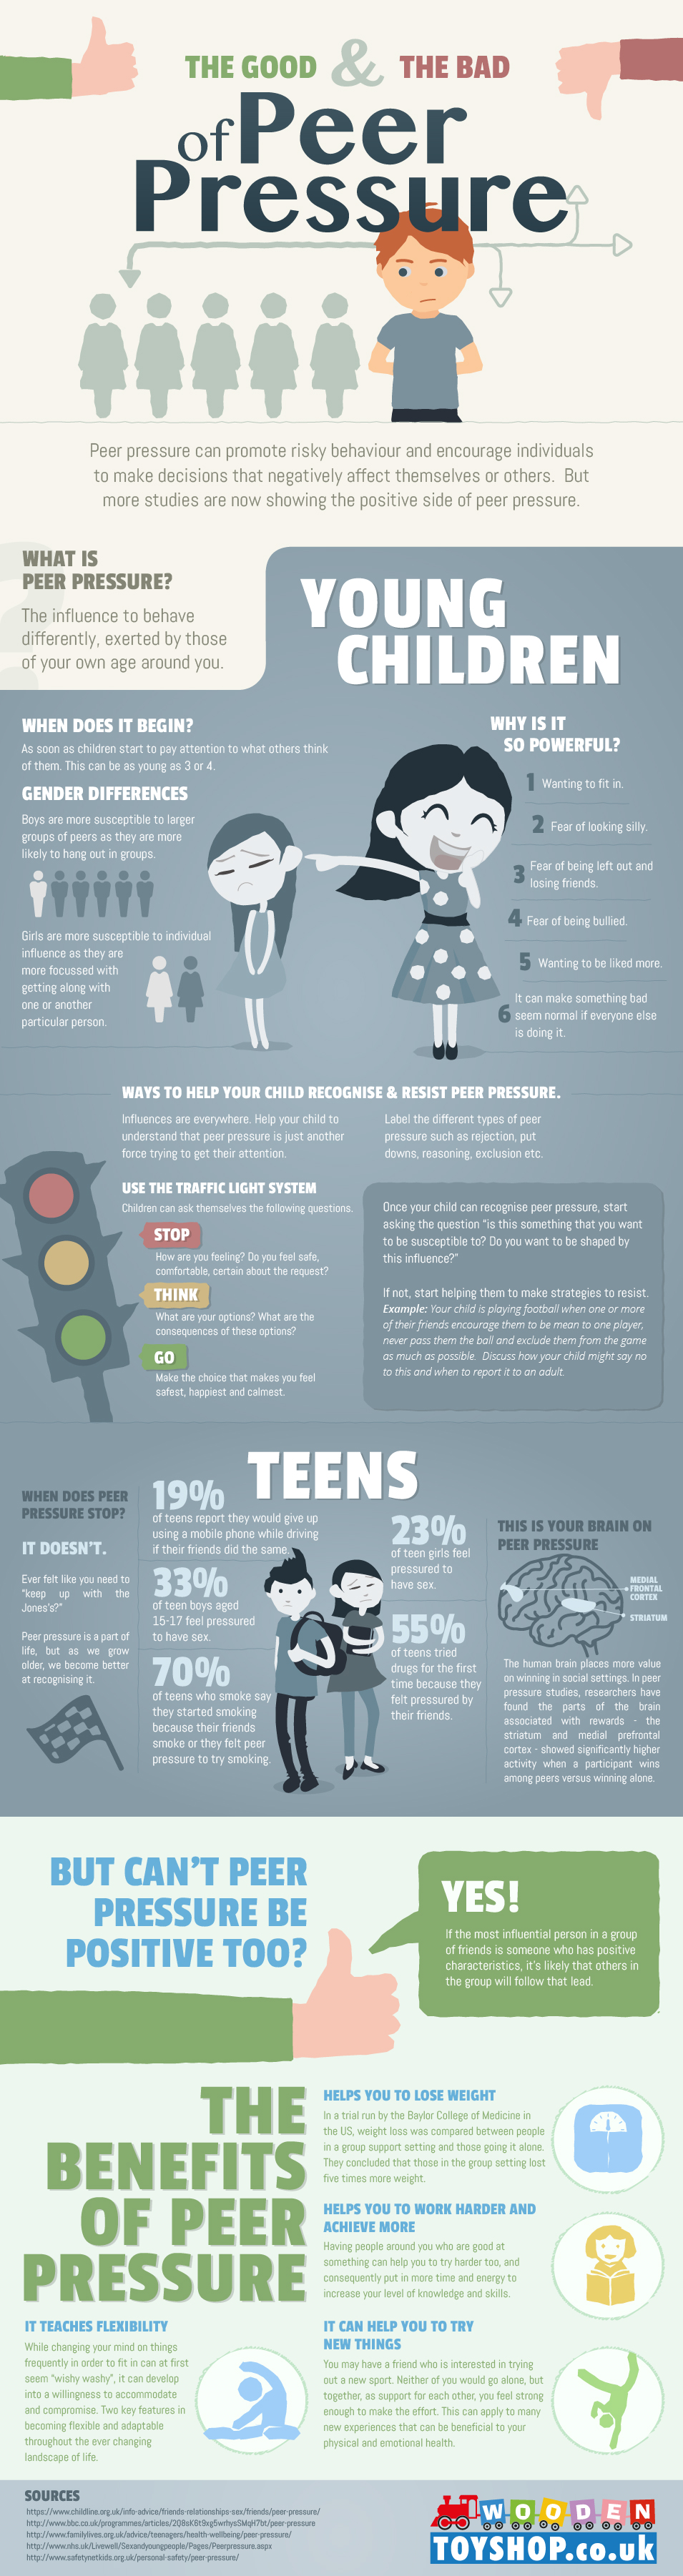 Managing Peer Pressure: The Good, the Bad, and the Ugly - Infographic